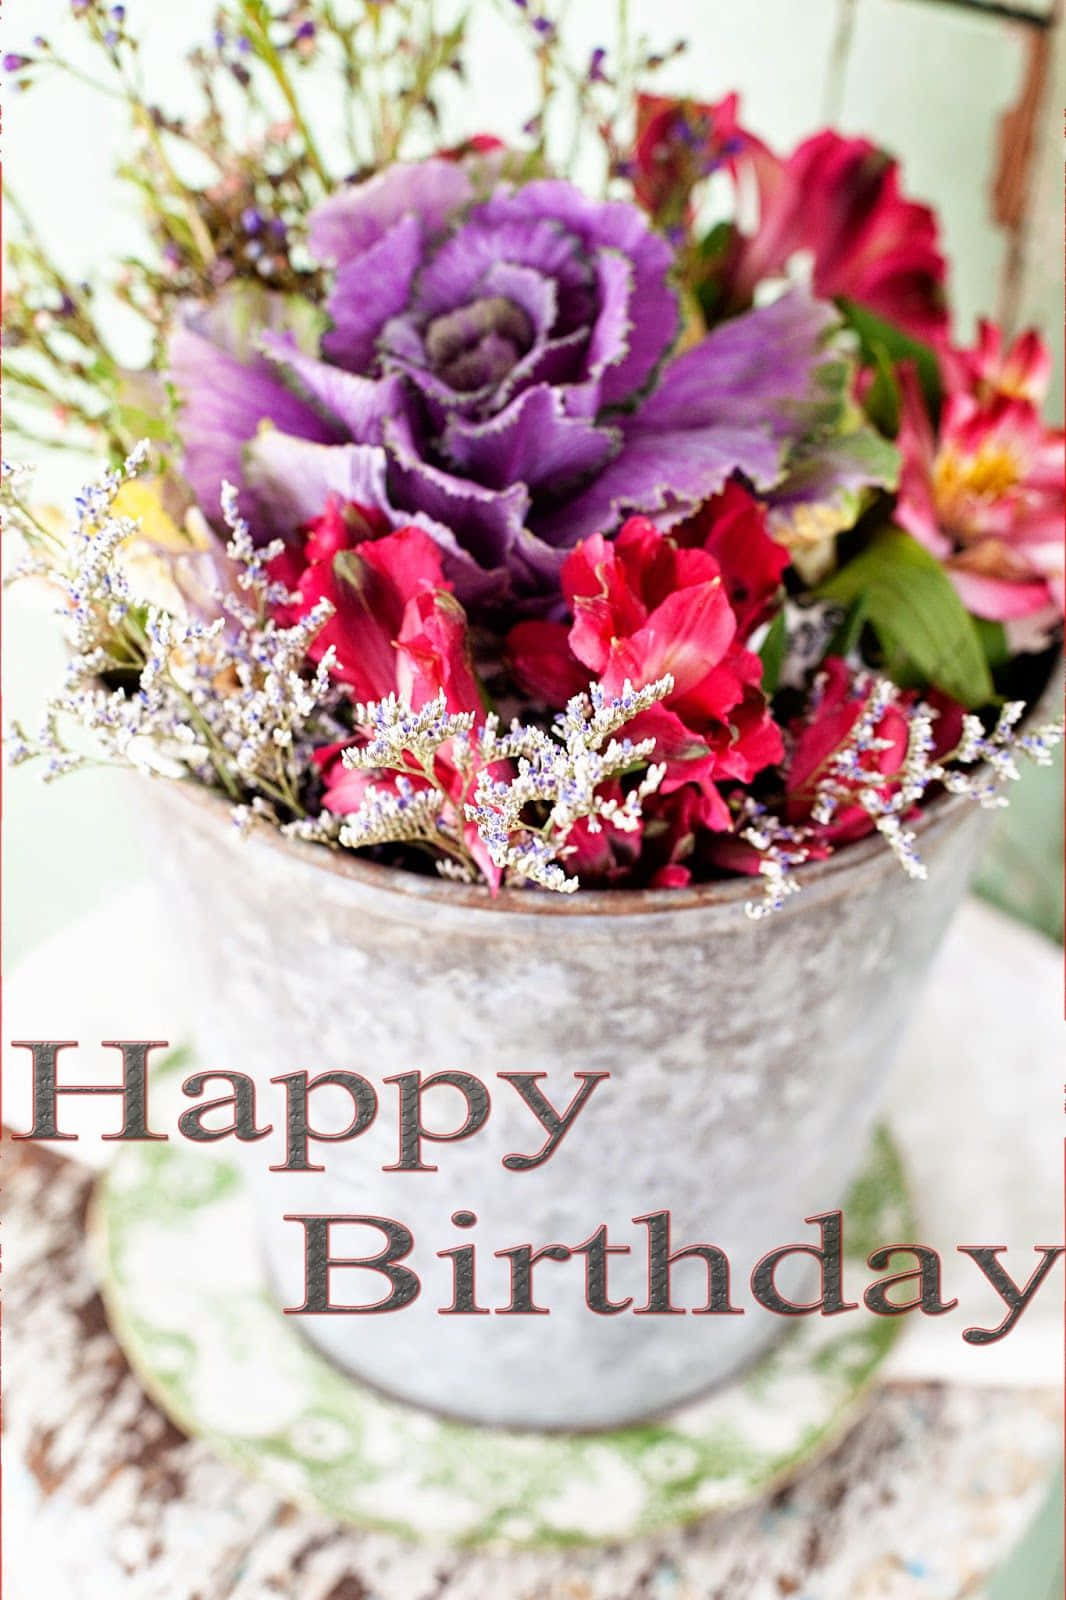 100+] Birthday Flowers Pictures | Wallpapers.com